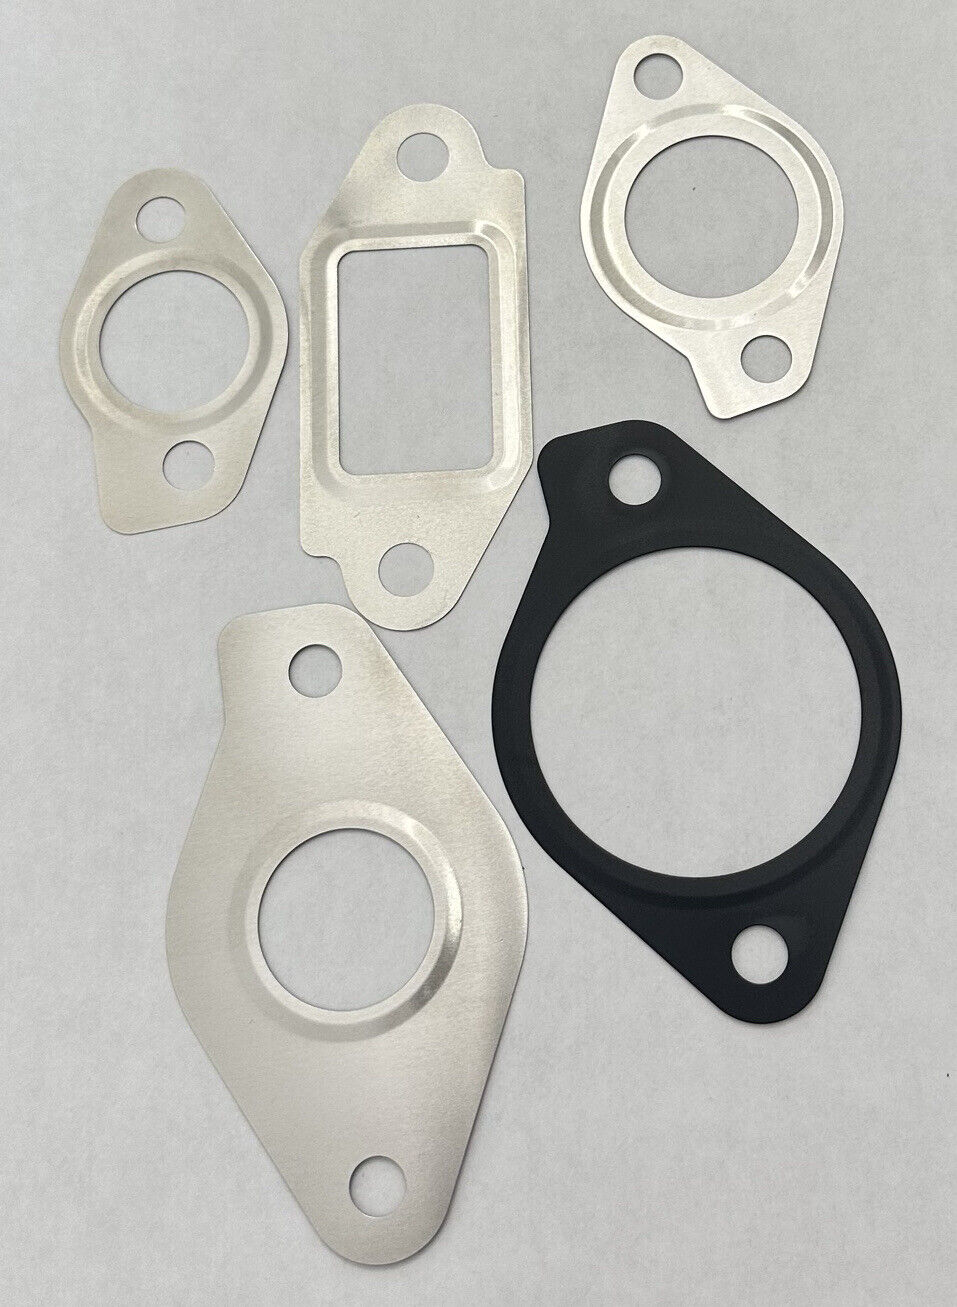 EGR Gasket Kit for Thermo King Refrigeration Precedent Units